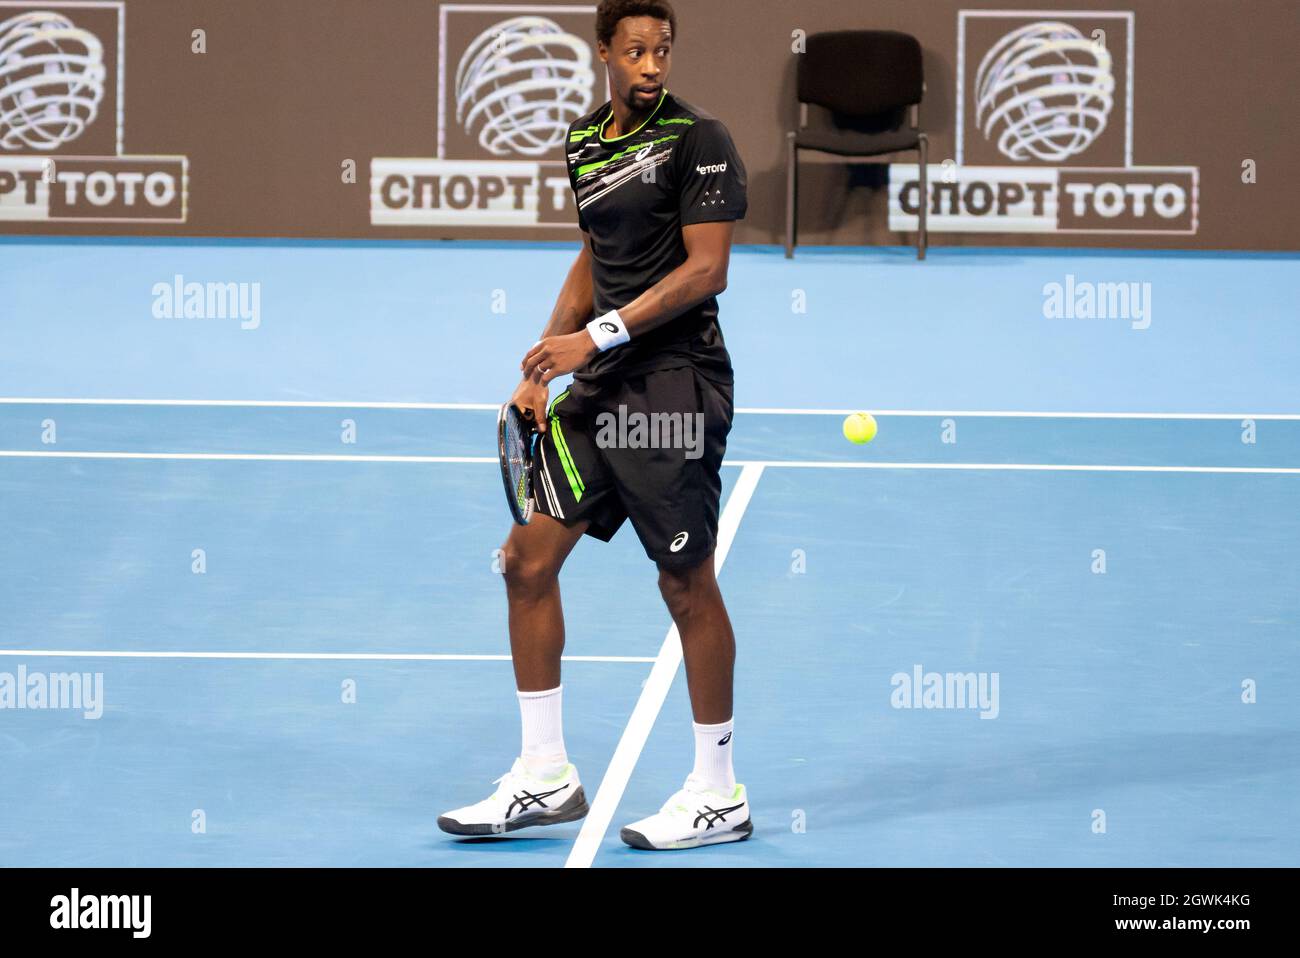 Sofia, Bulgaria. 03 October 2021. Gael Monfils of France walking out of court defeated 6:3 6:4 by Jannik Sinner of Italy at the the Sofia Open 2021 ATP 250 indoor tennis tournament men's singles final, Sofia, Bulgaria. Credit: Ognyan Yosifov/Alamy Live News Stock Photo